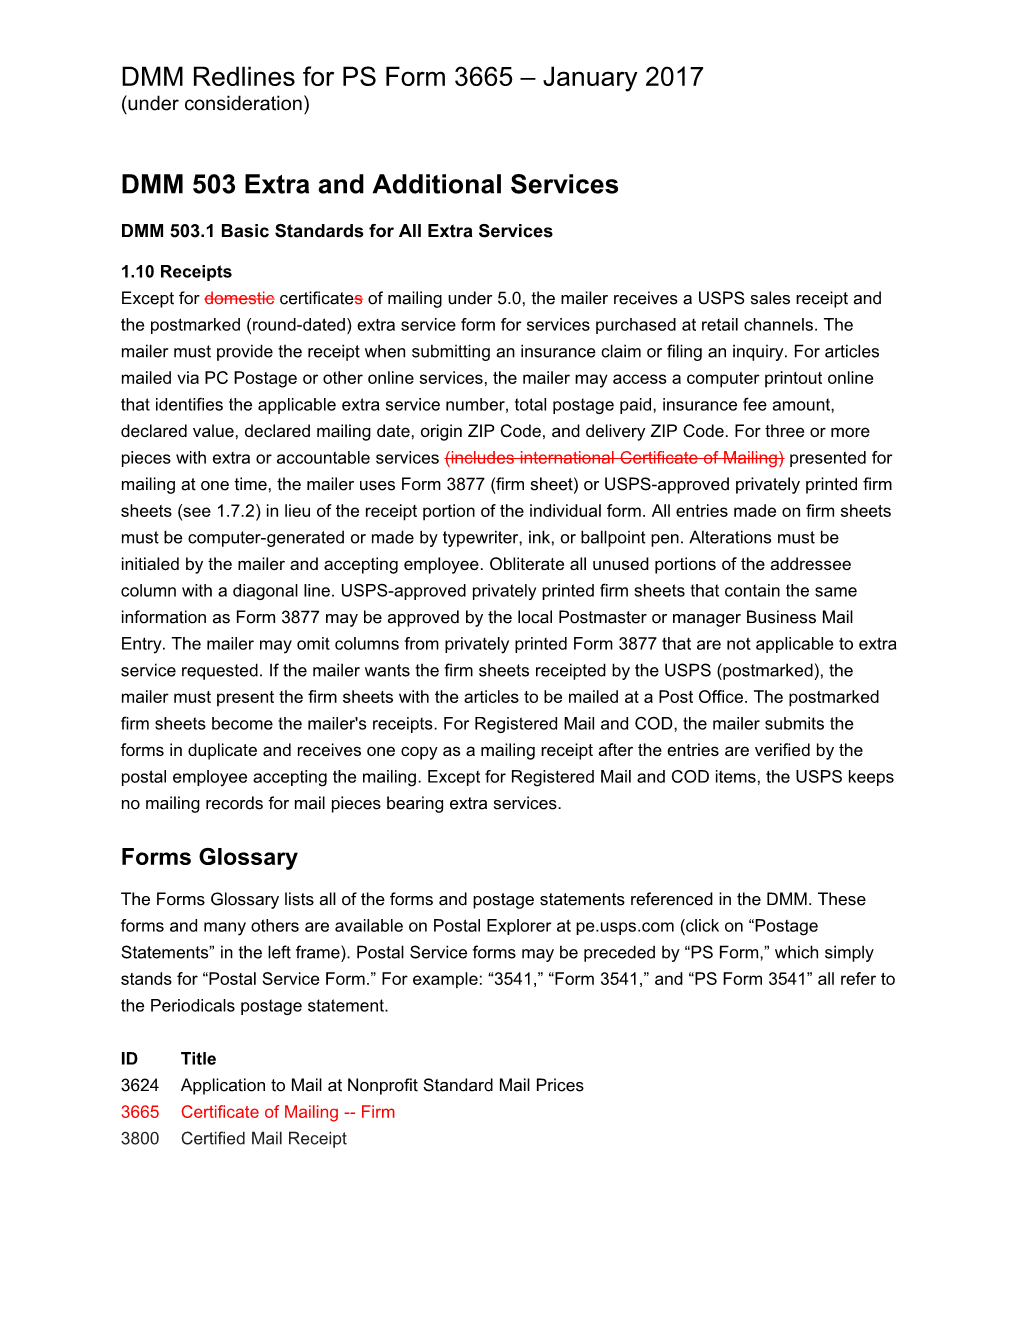 DMM 503.1 Basic Standards for All Extra Services